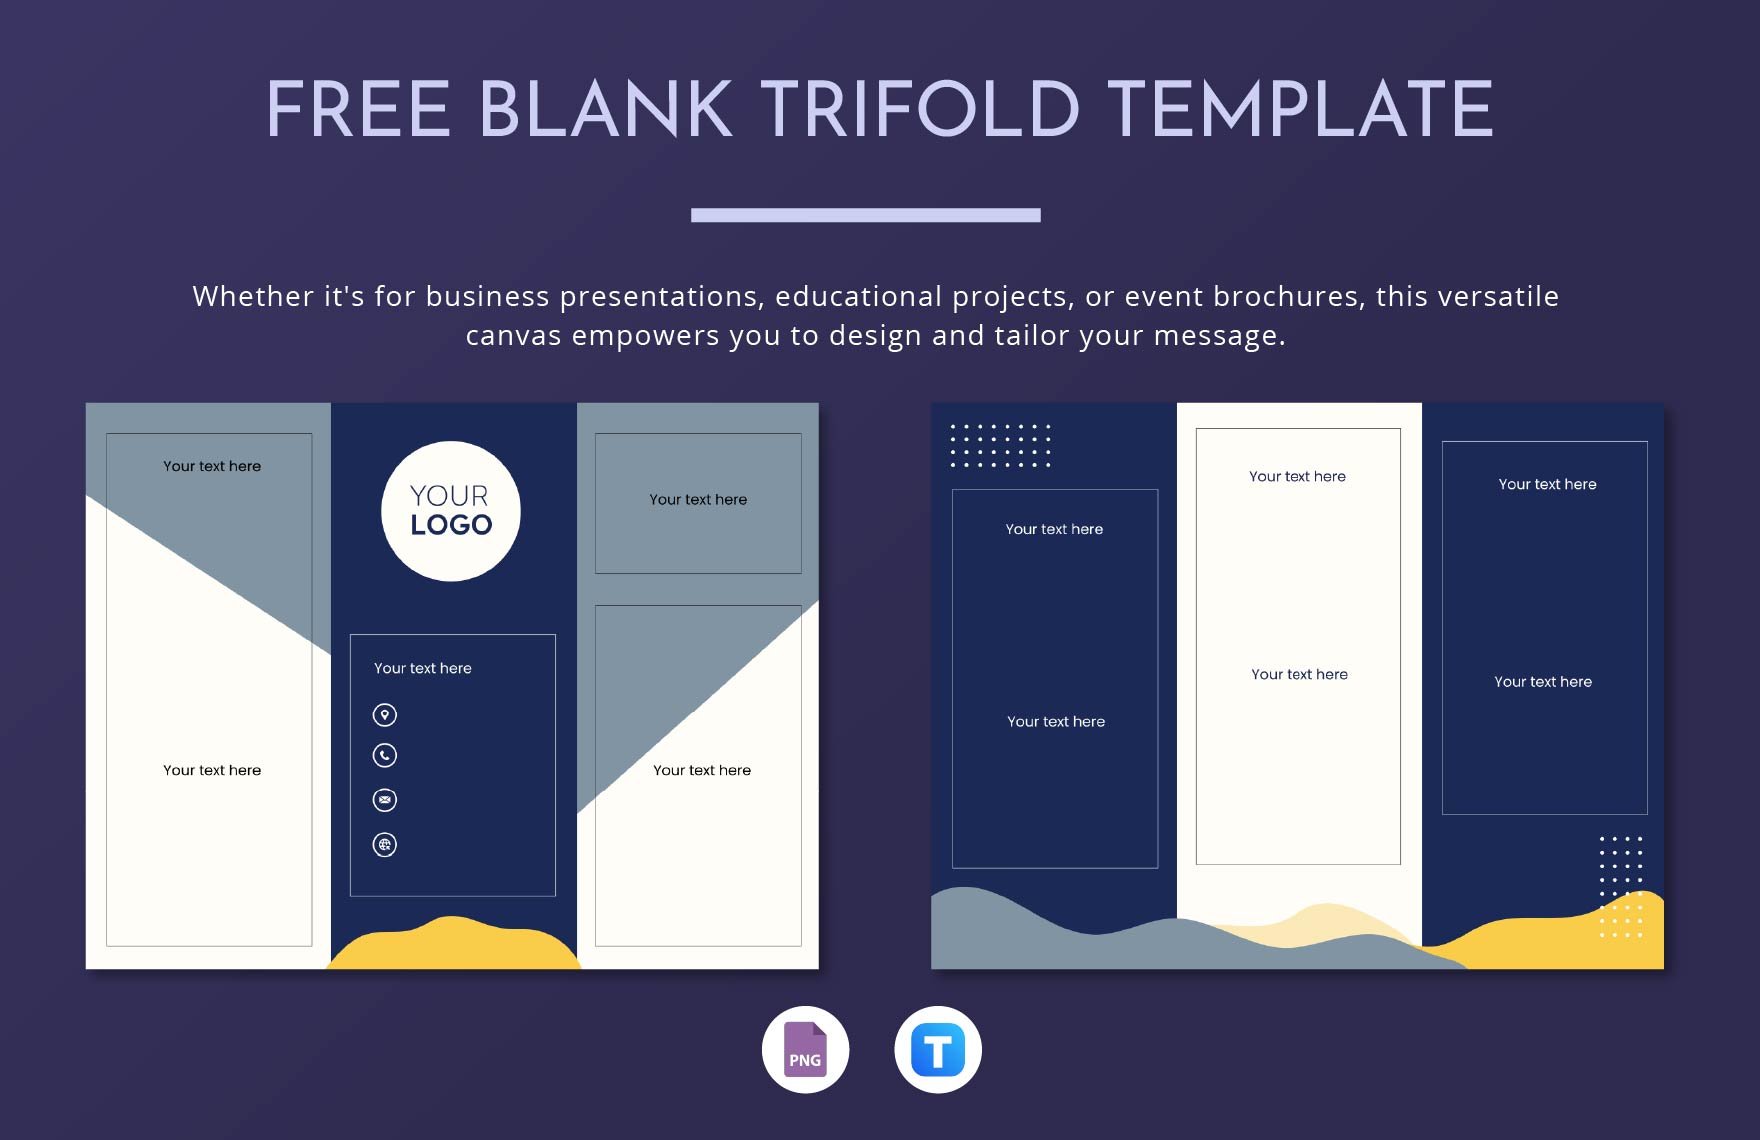 Free Blank Trifold Template